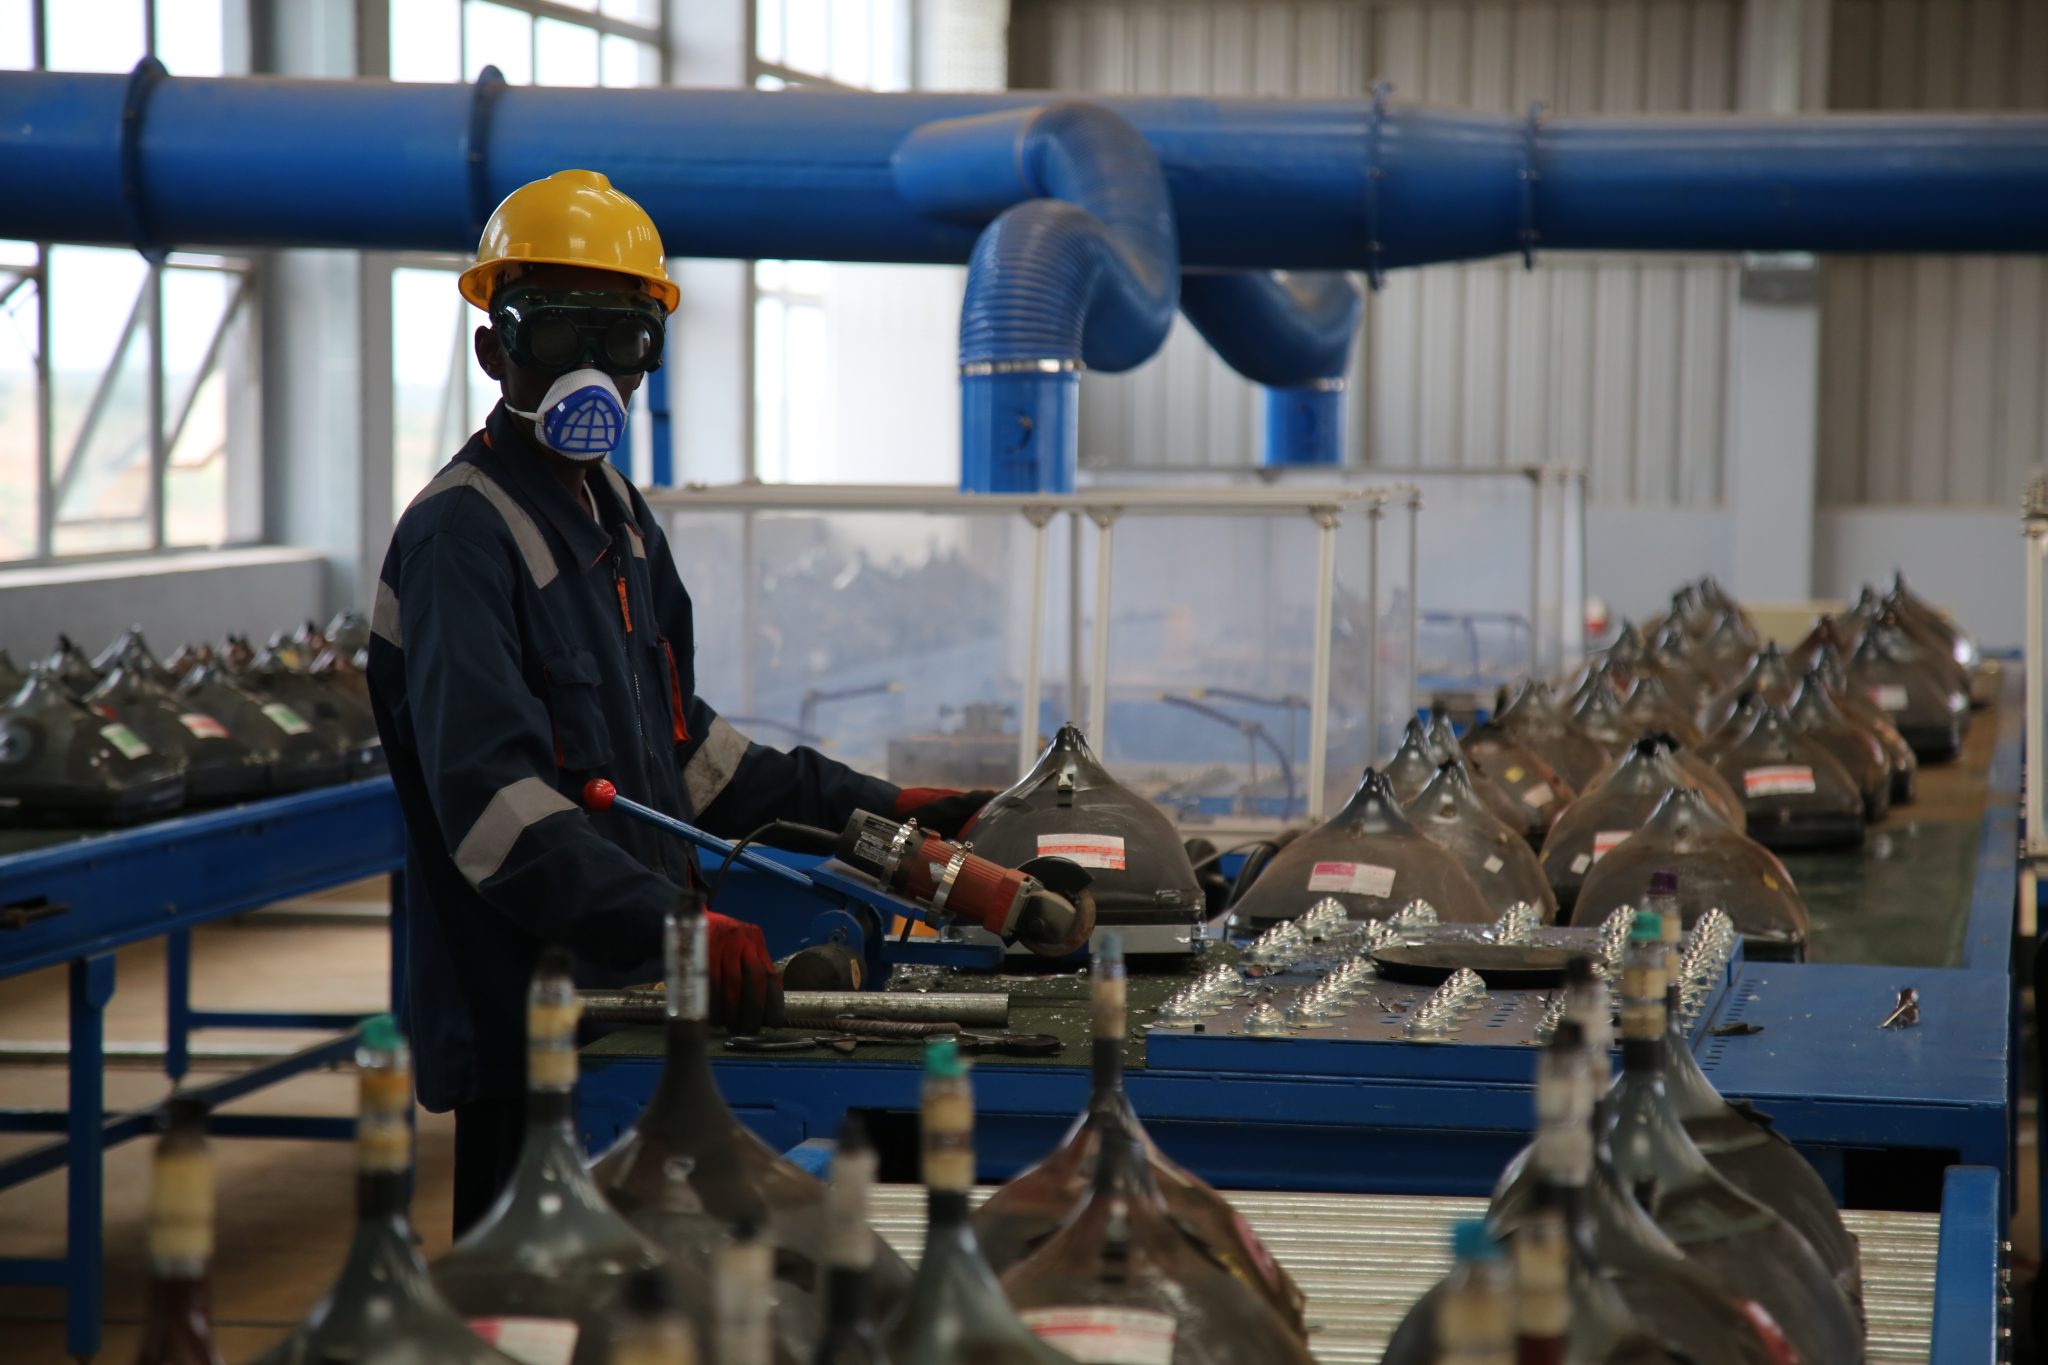 Man treating waste in a recycling facility